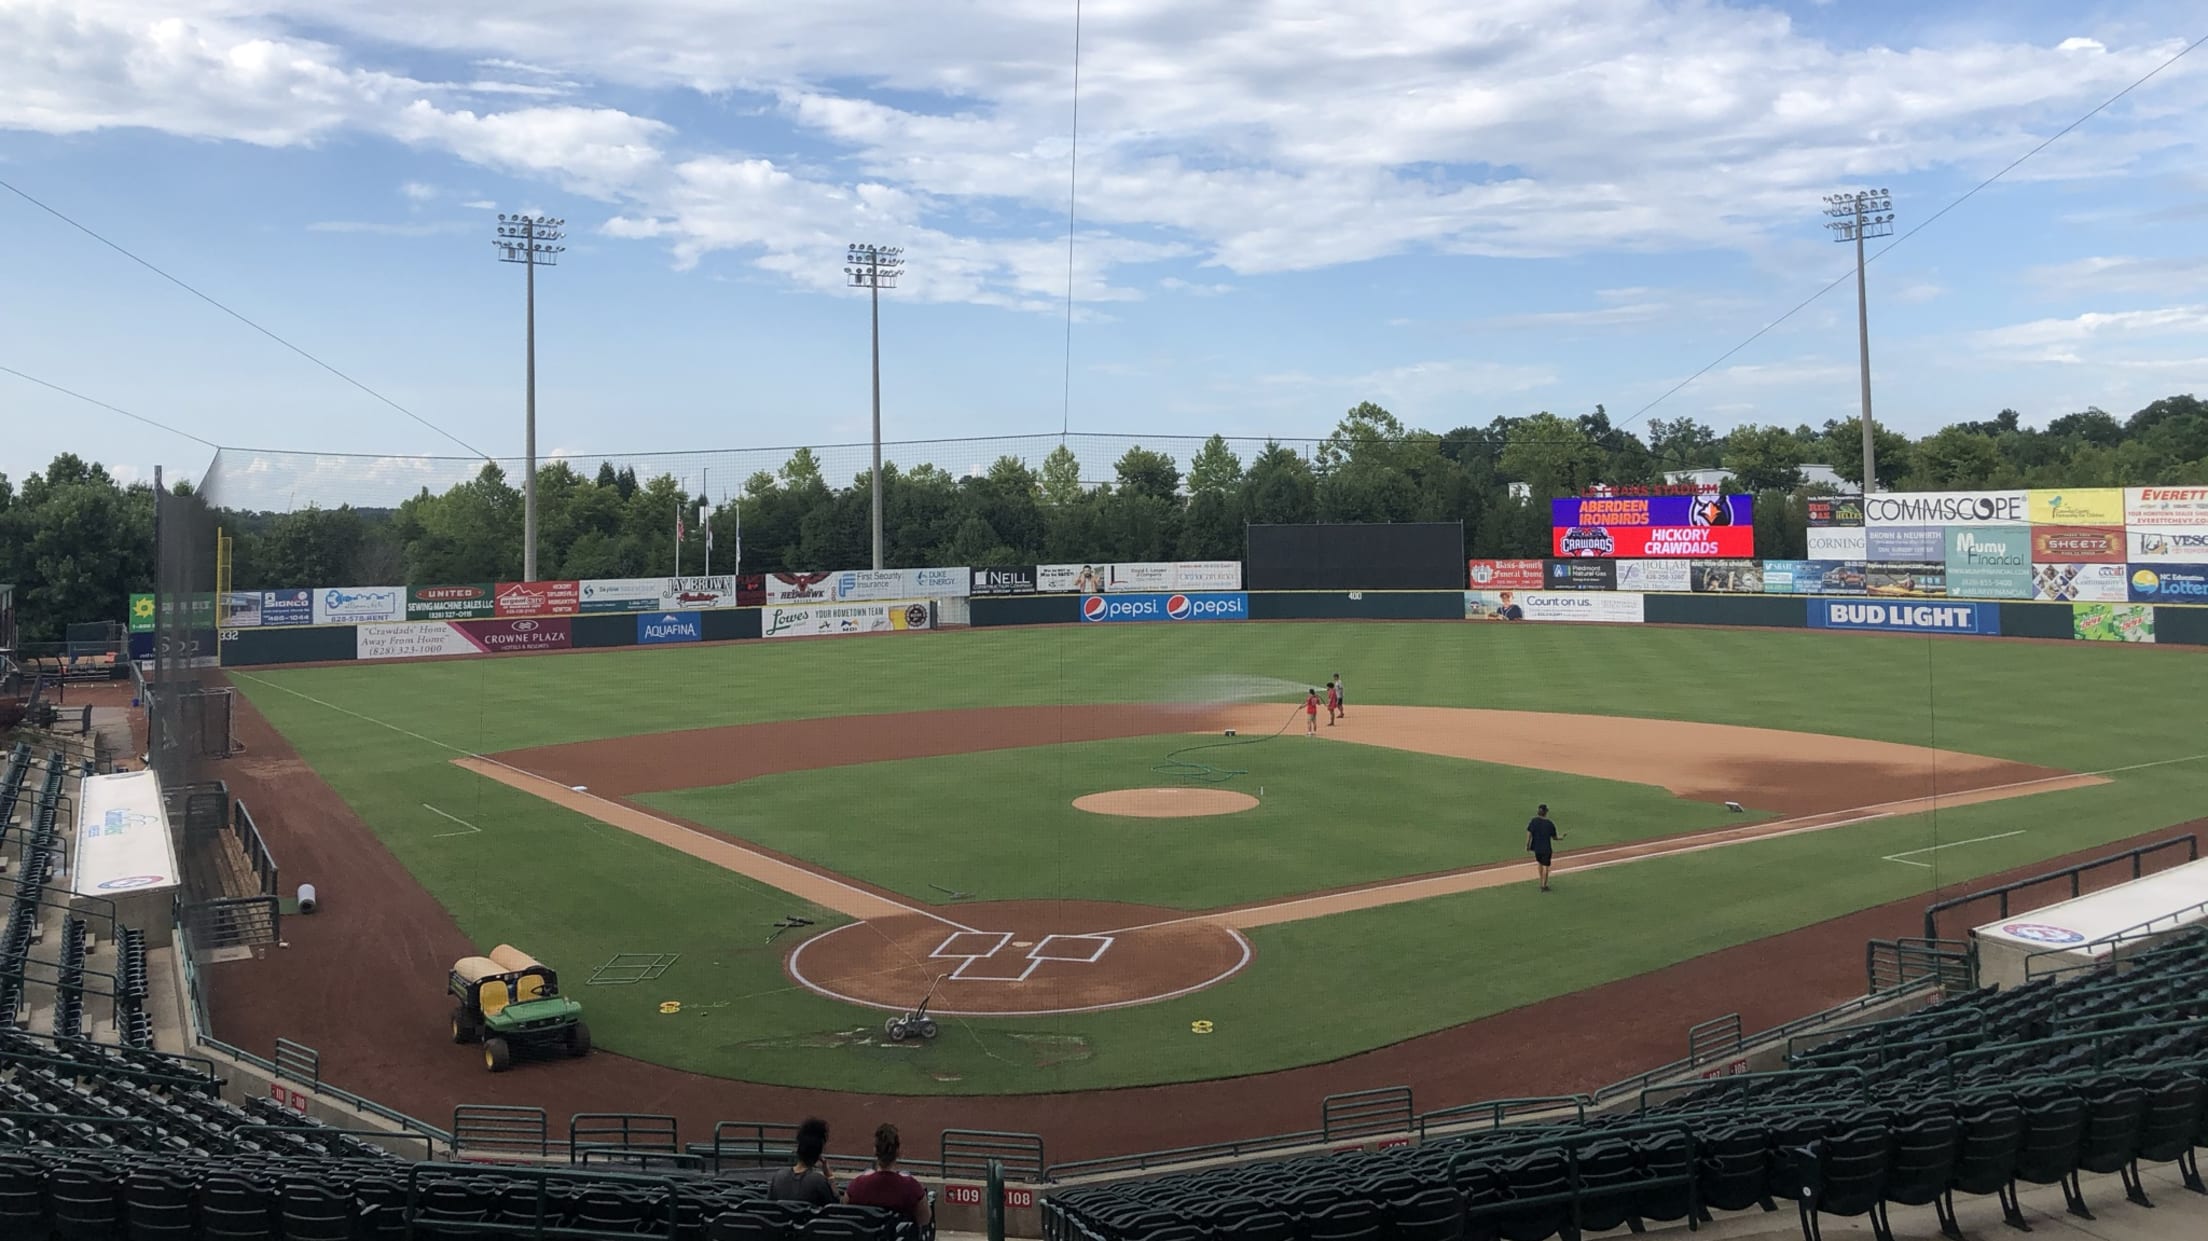 Visit LP Frans Stadium, home of the Hickory Crawdads